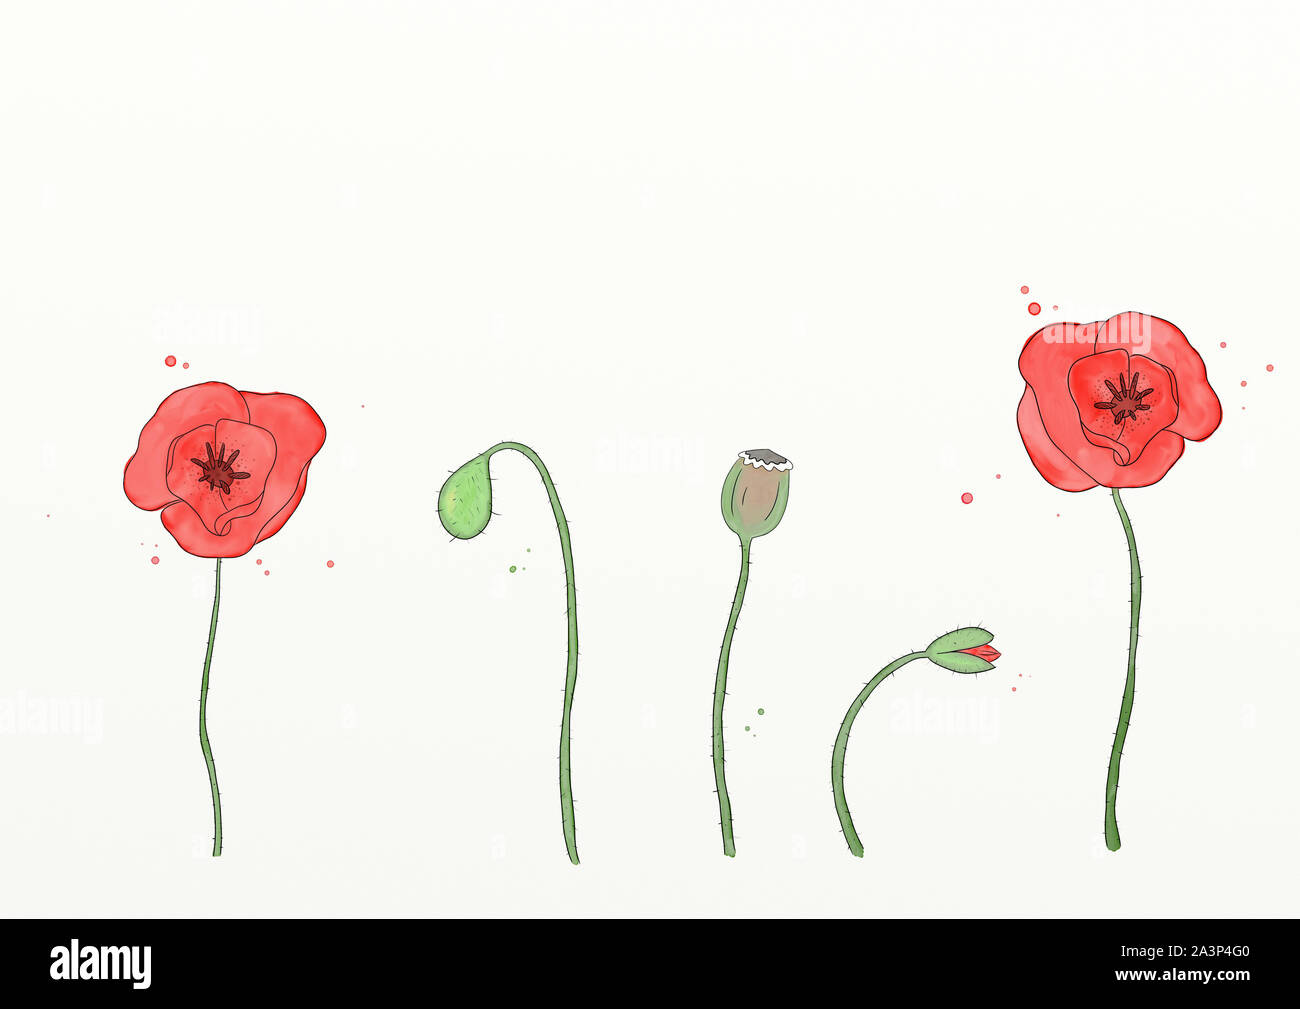 An illustration of red poppies. Watercolor. Stock Photo